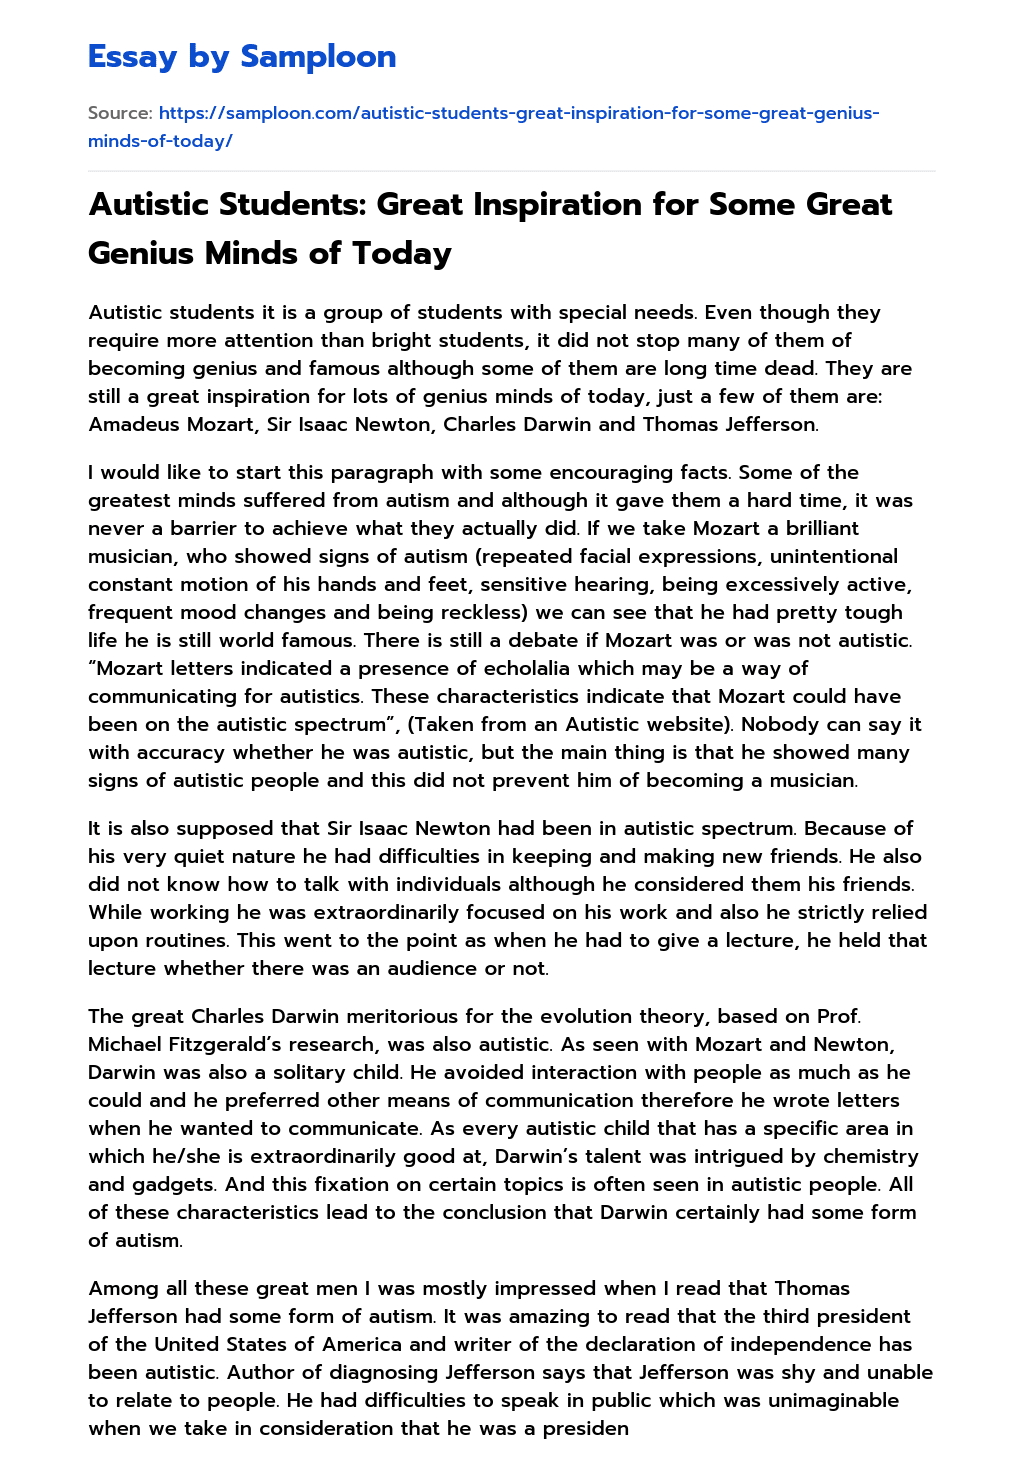 college essay about being autistic